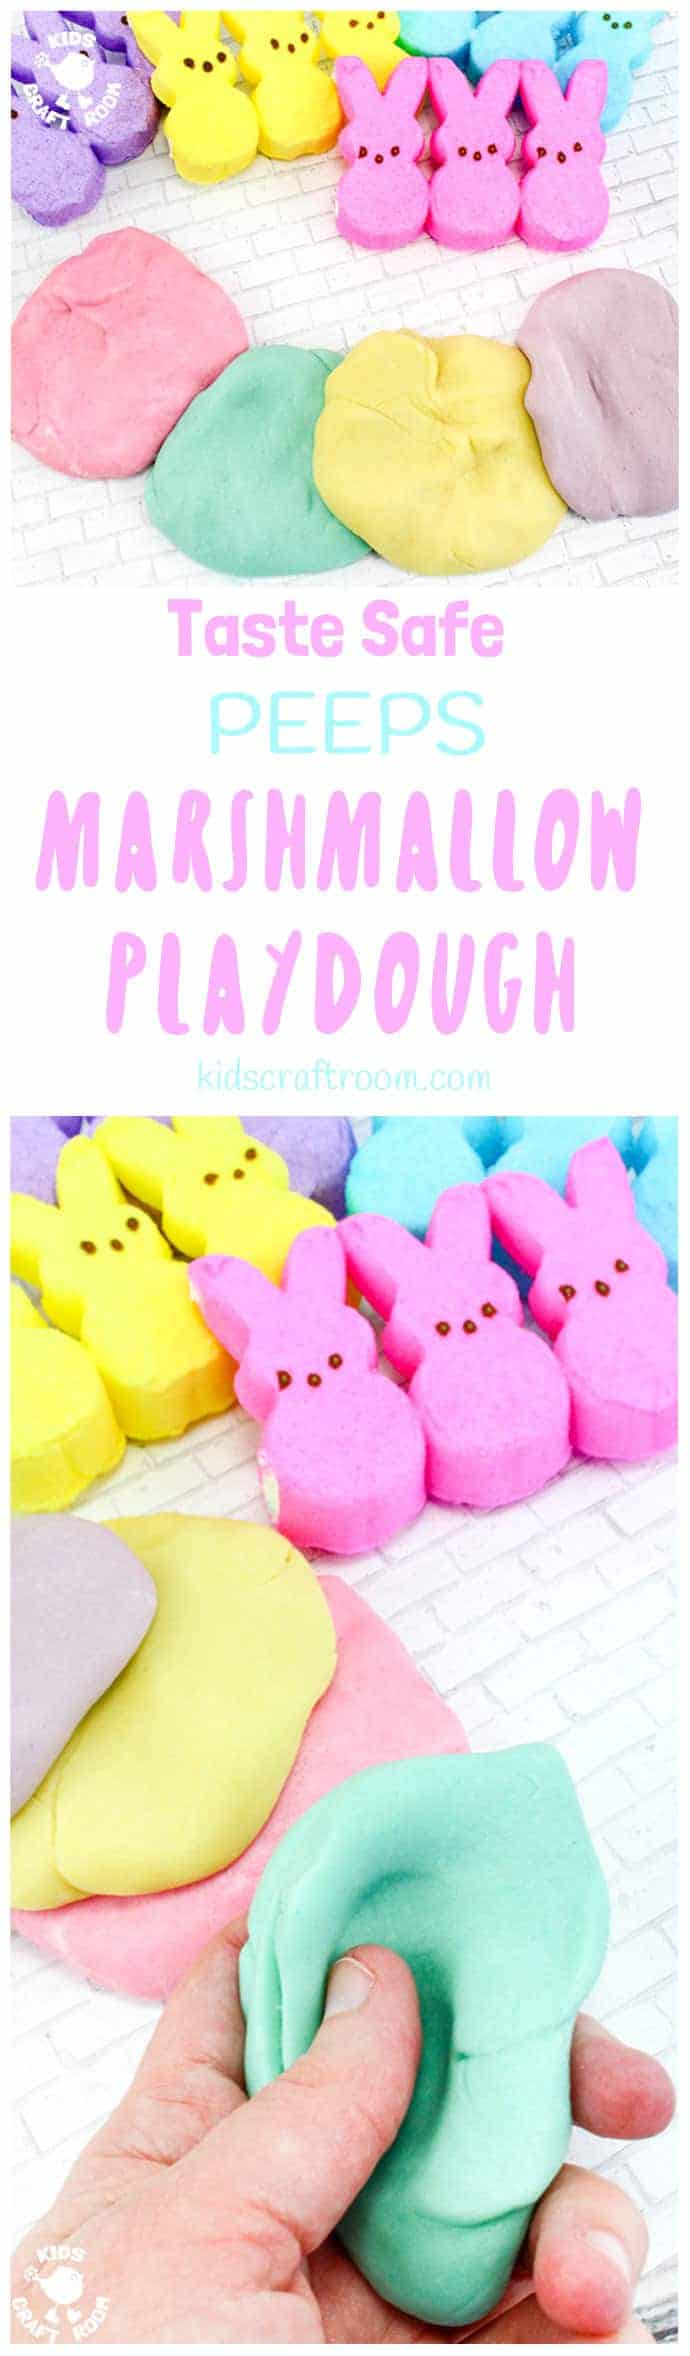 Kids will have hours of fun with this Taste Safe Peeps Marshmallow Play Dough. It's fluffy and soft, smells good and the colours are gorgeous pastels. A truly multi sensory play experience for kids of all ages. #sensoryplay #ECE #Easter #sensory #playdough #playdoughrecipe #edibleplaydough #playdoh #playdohrecipe #easteractivities #kidsactivities #peeps #kidscraftroom #sensory #preschool #earlyyears #playideas